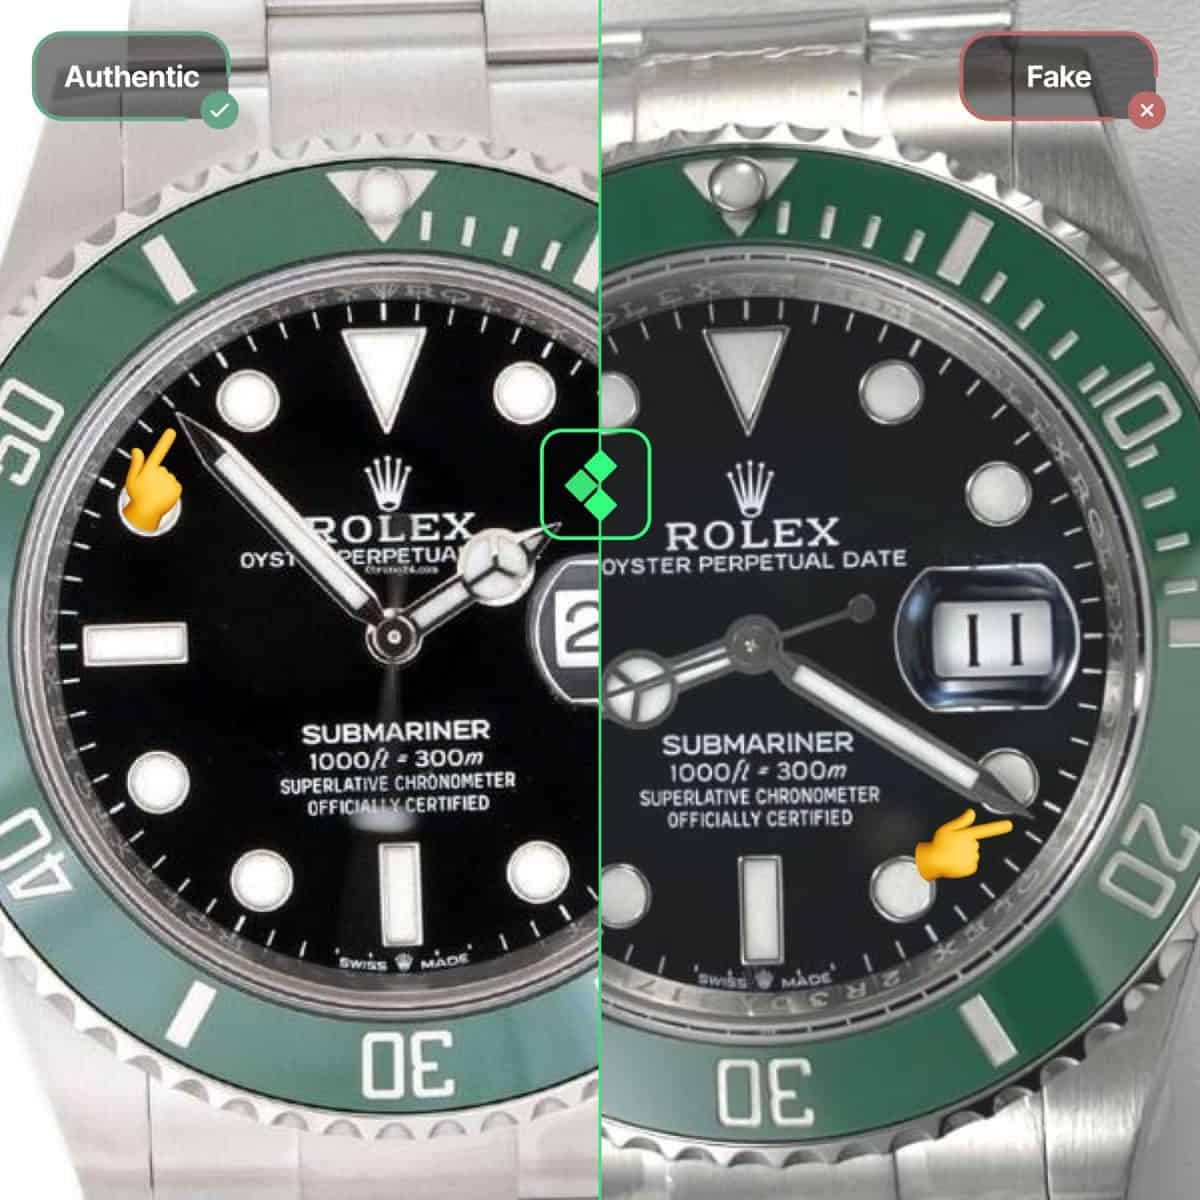 15 Reasons Not To Buy A Replica, Counterfeit Or Fake Watch